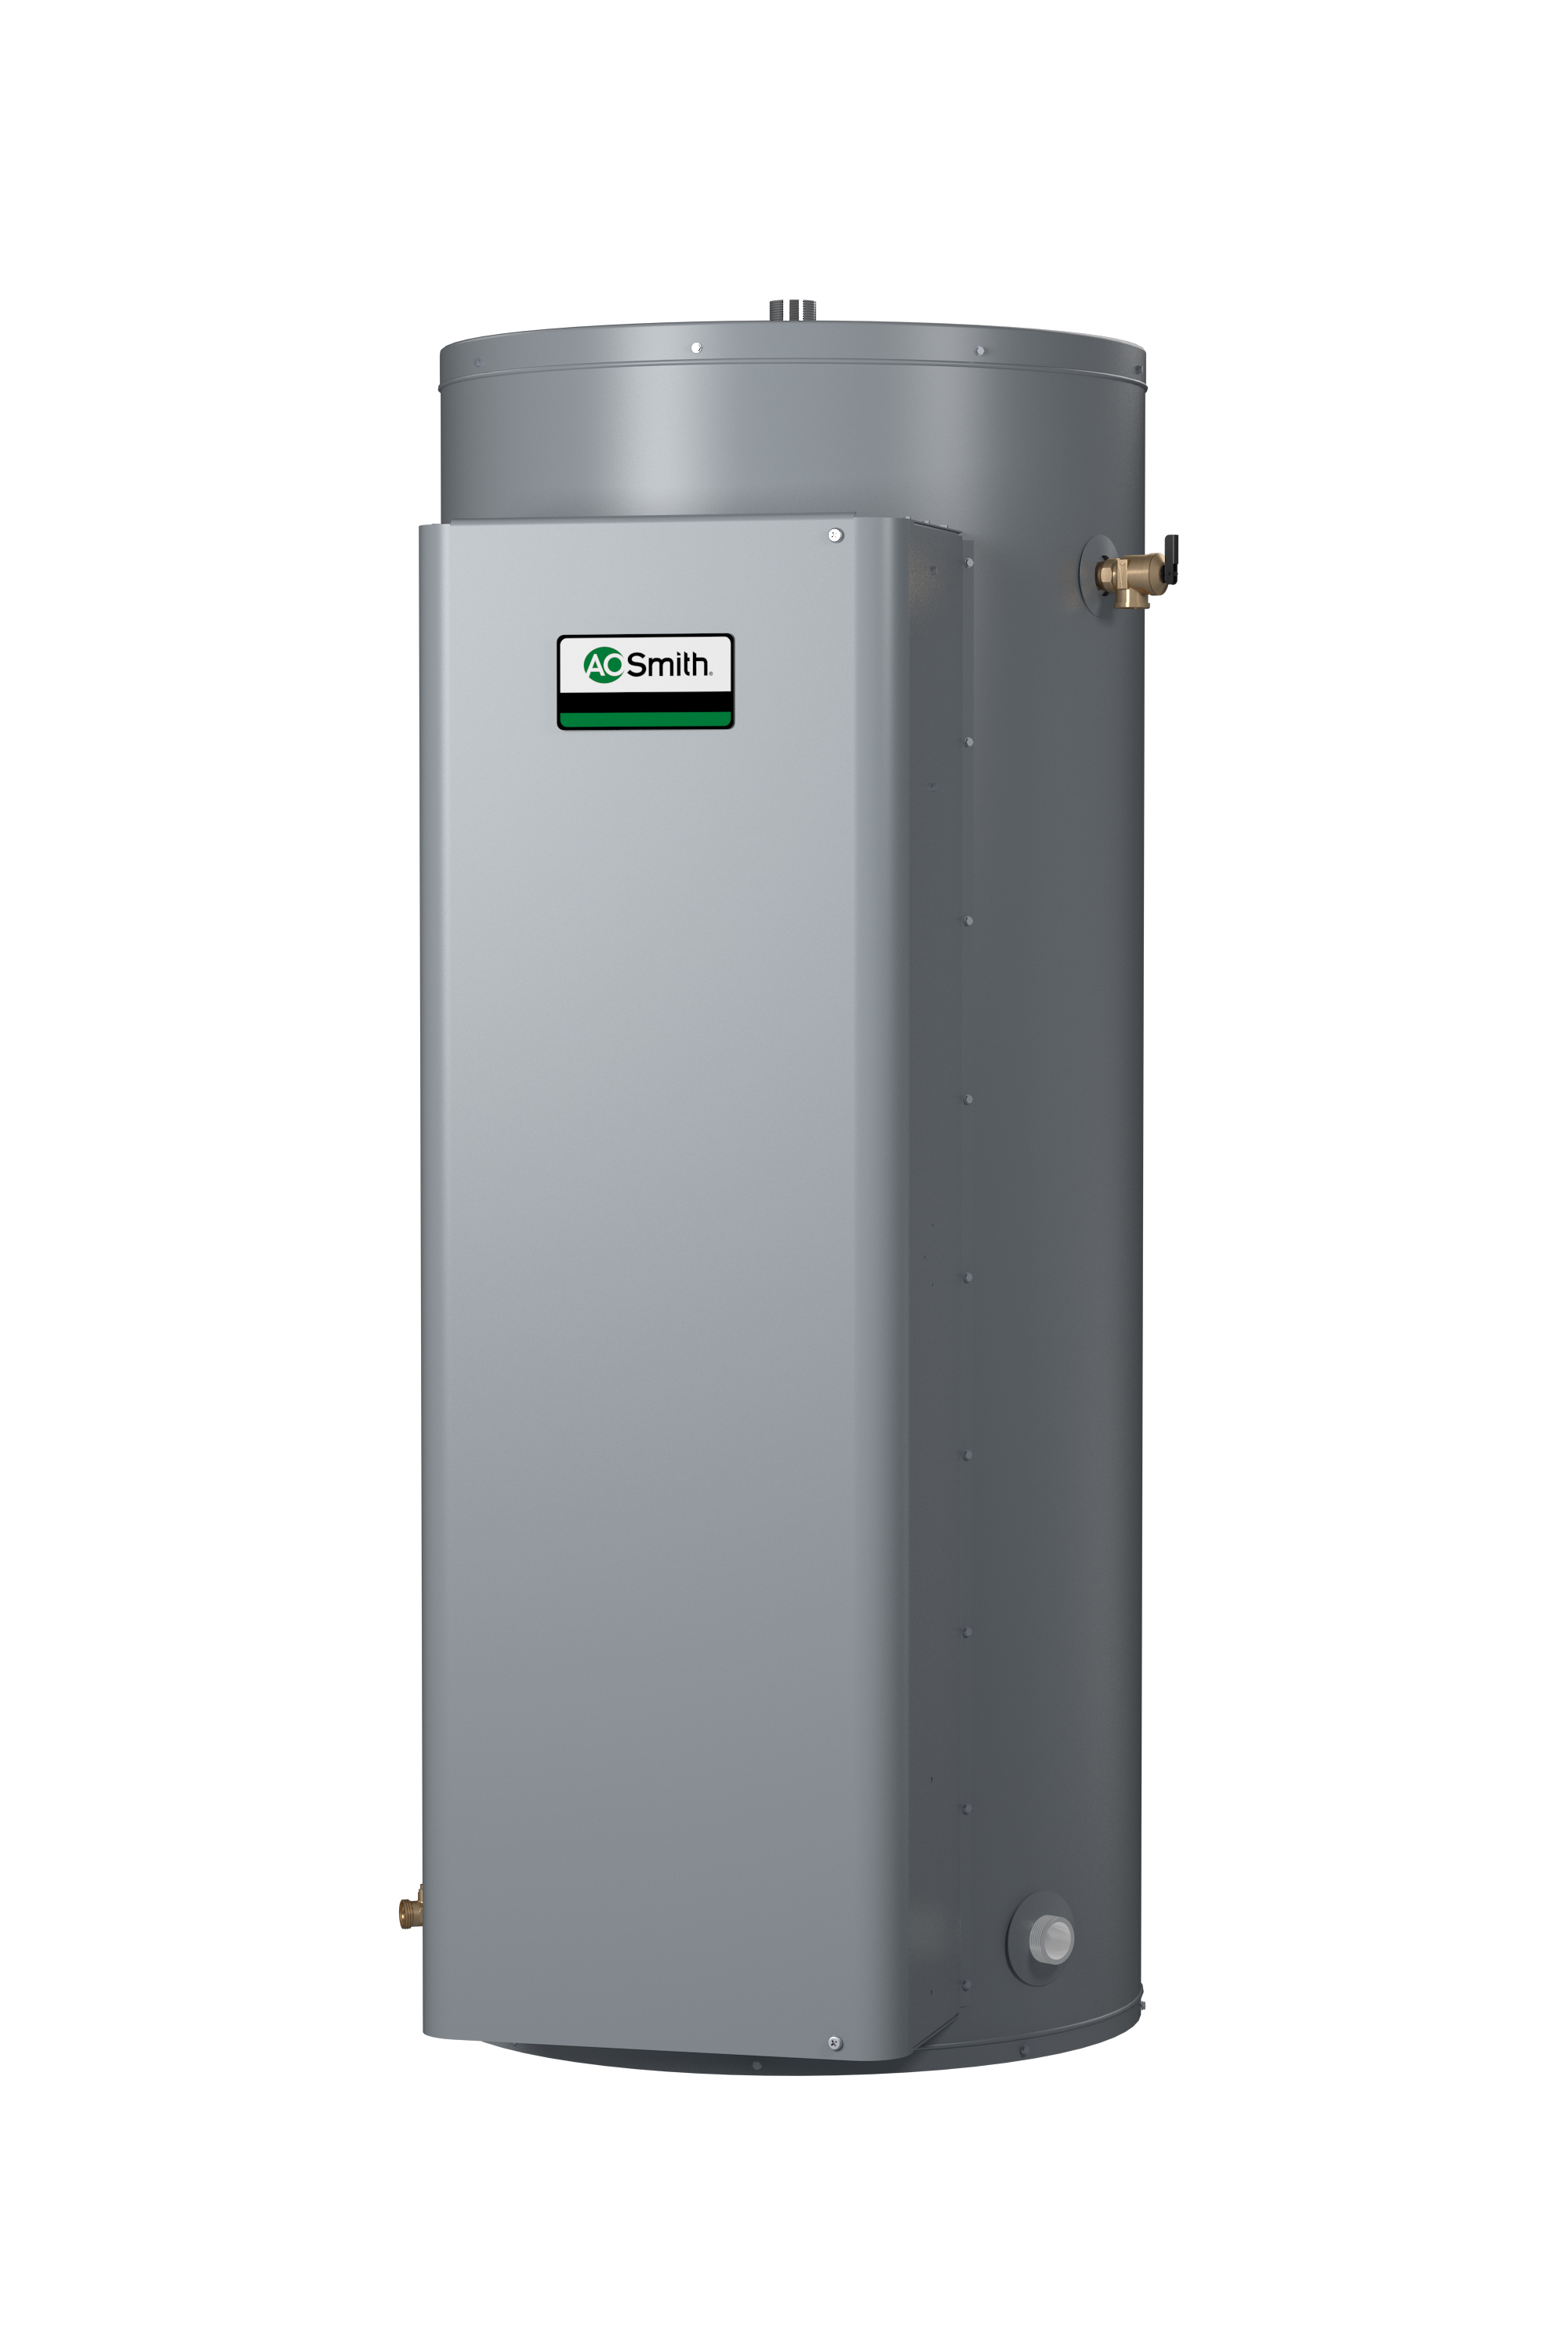 AO SMITH DVE-120-18, 119 GALLONS, 18.0KW, 240 VOLT, 43.3 AMPS, 3 PHASE, 3 ELEMENT, GOLD Xi SERIES HEAVY DUTY COMMERCIAL ELECTRIC WATER HEATER